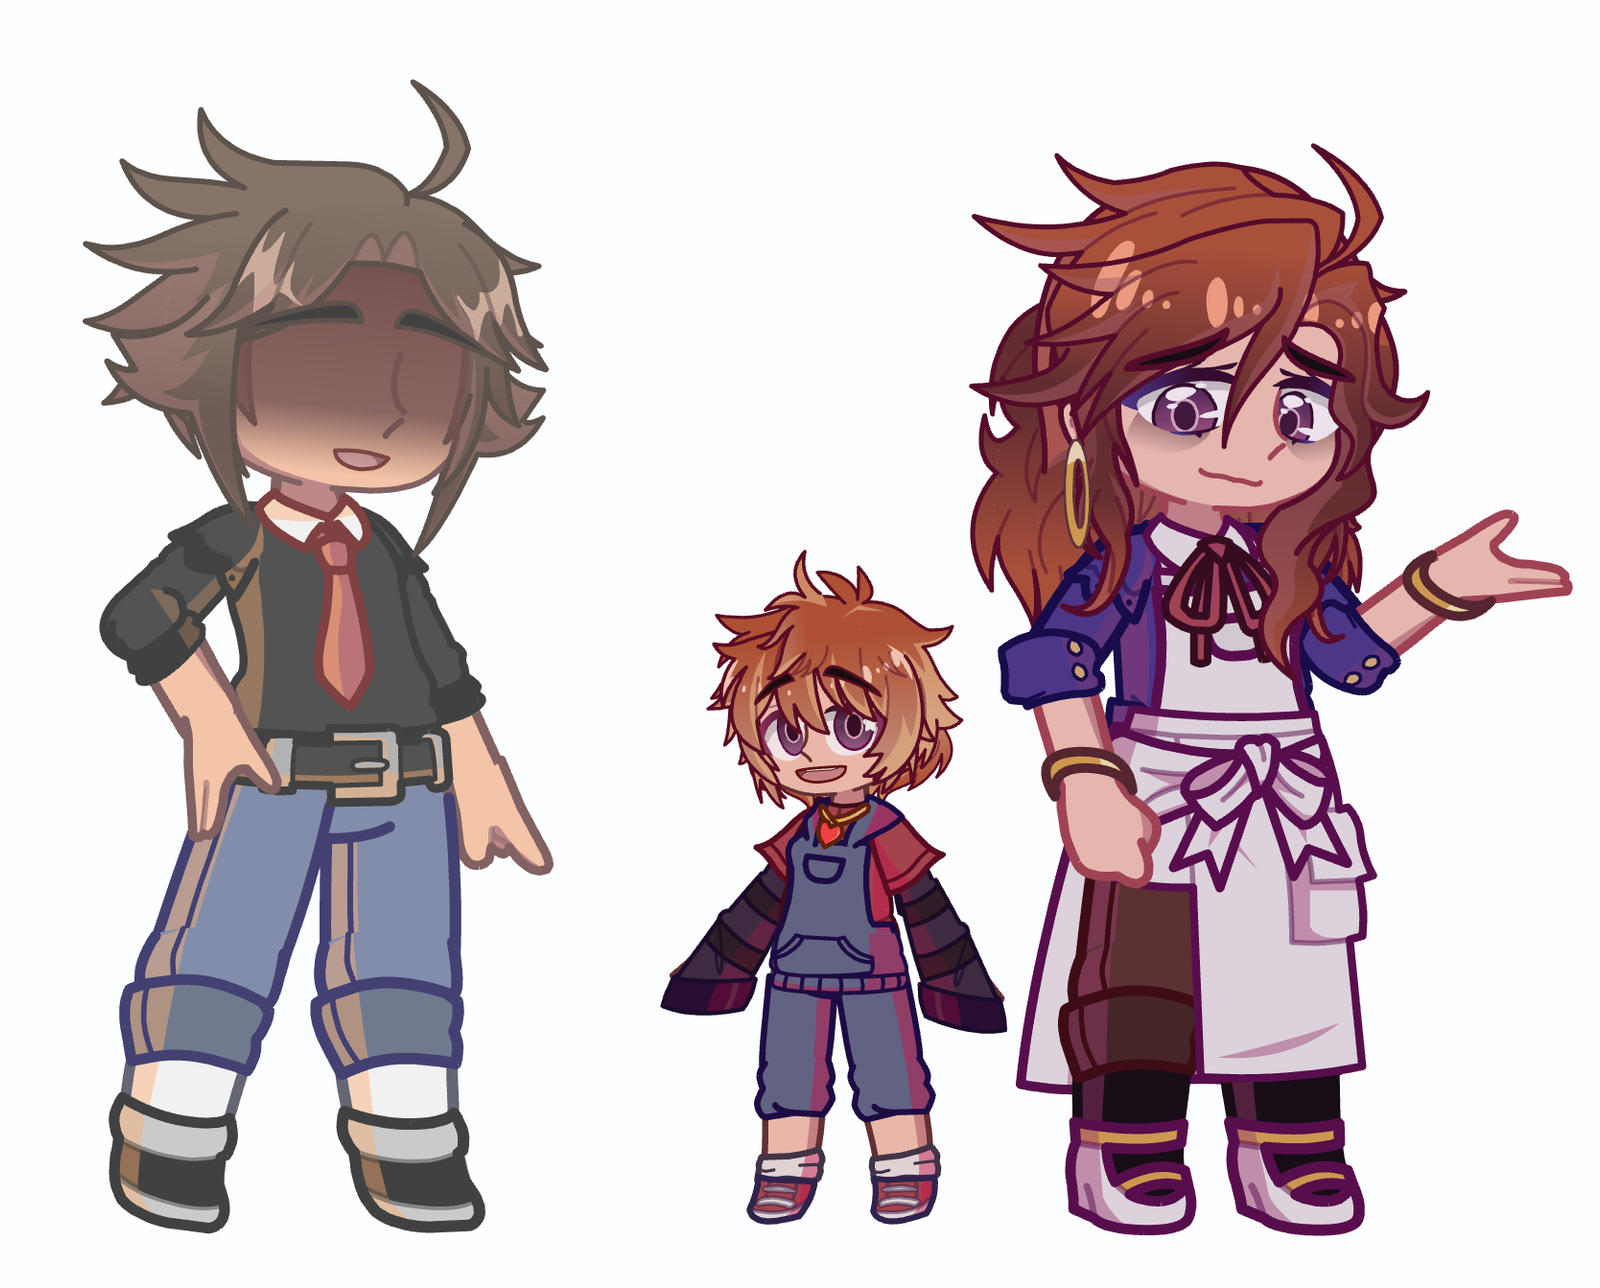 Not me struggling to redesign old gacha life villain ocs i made 2